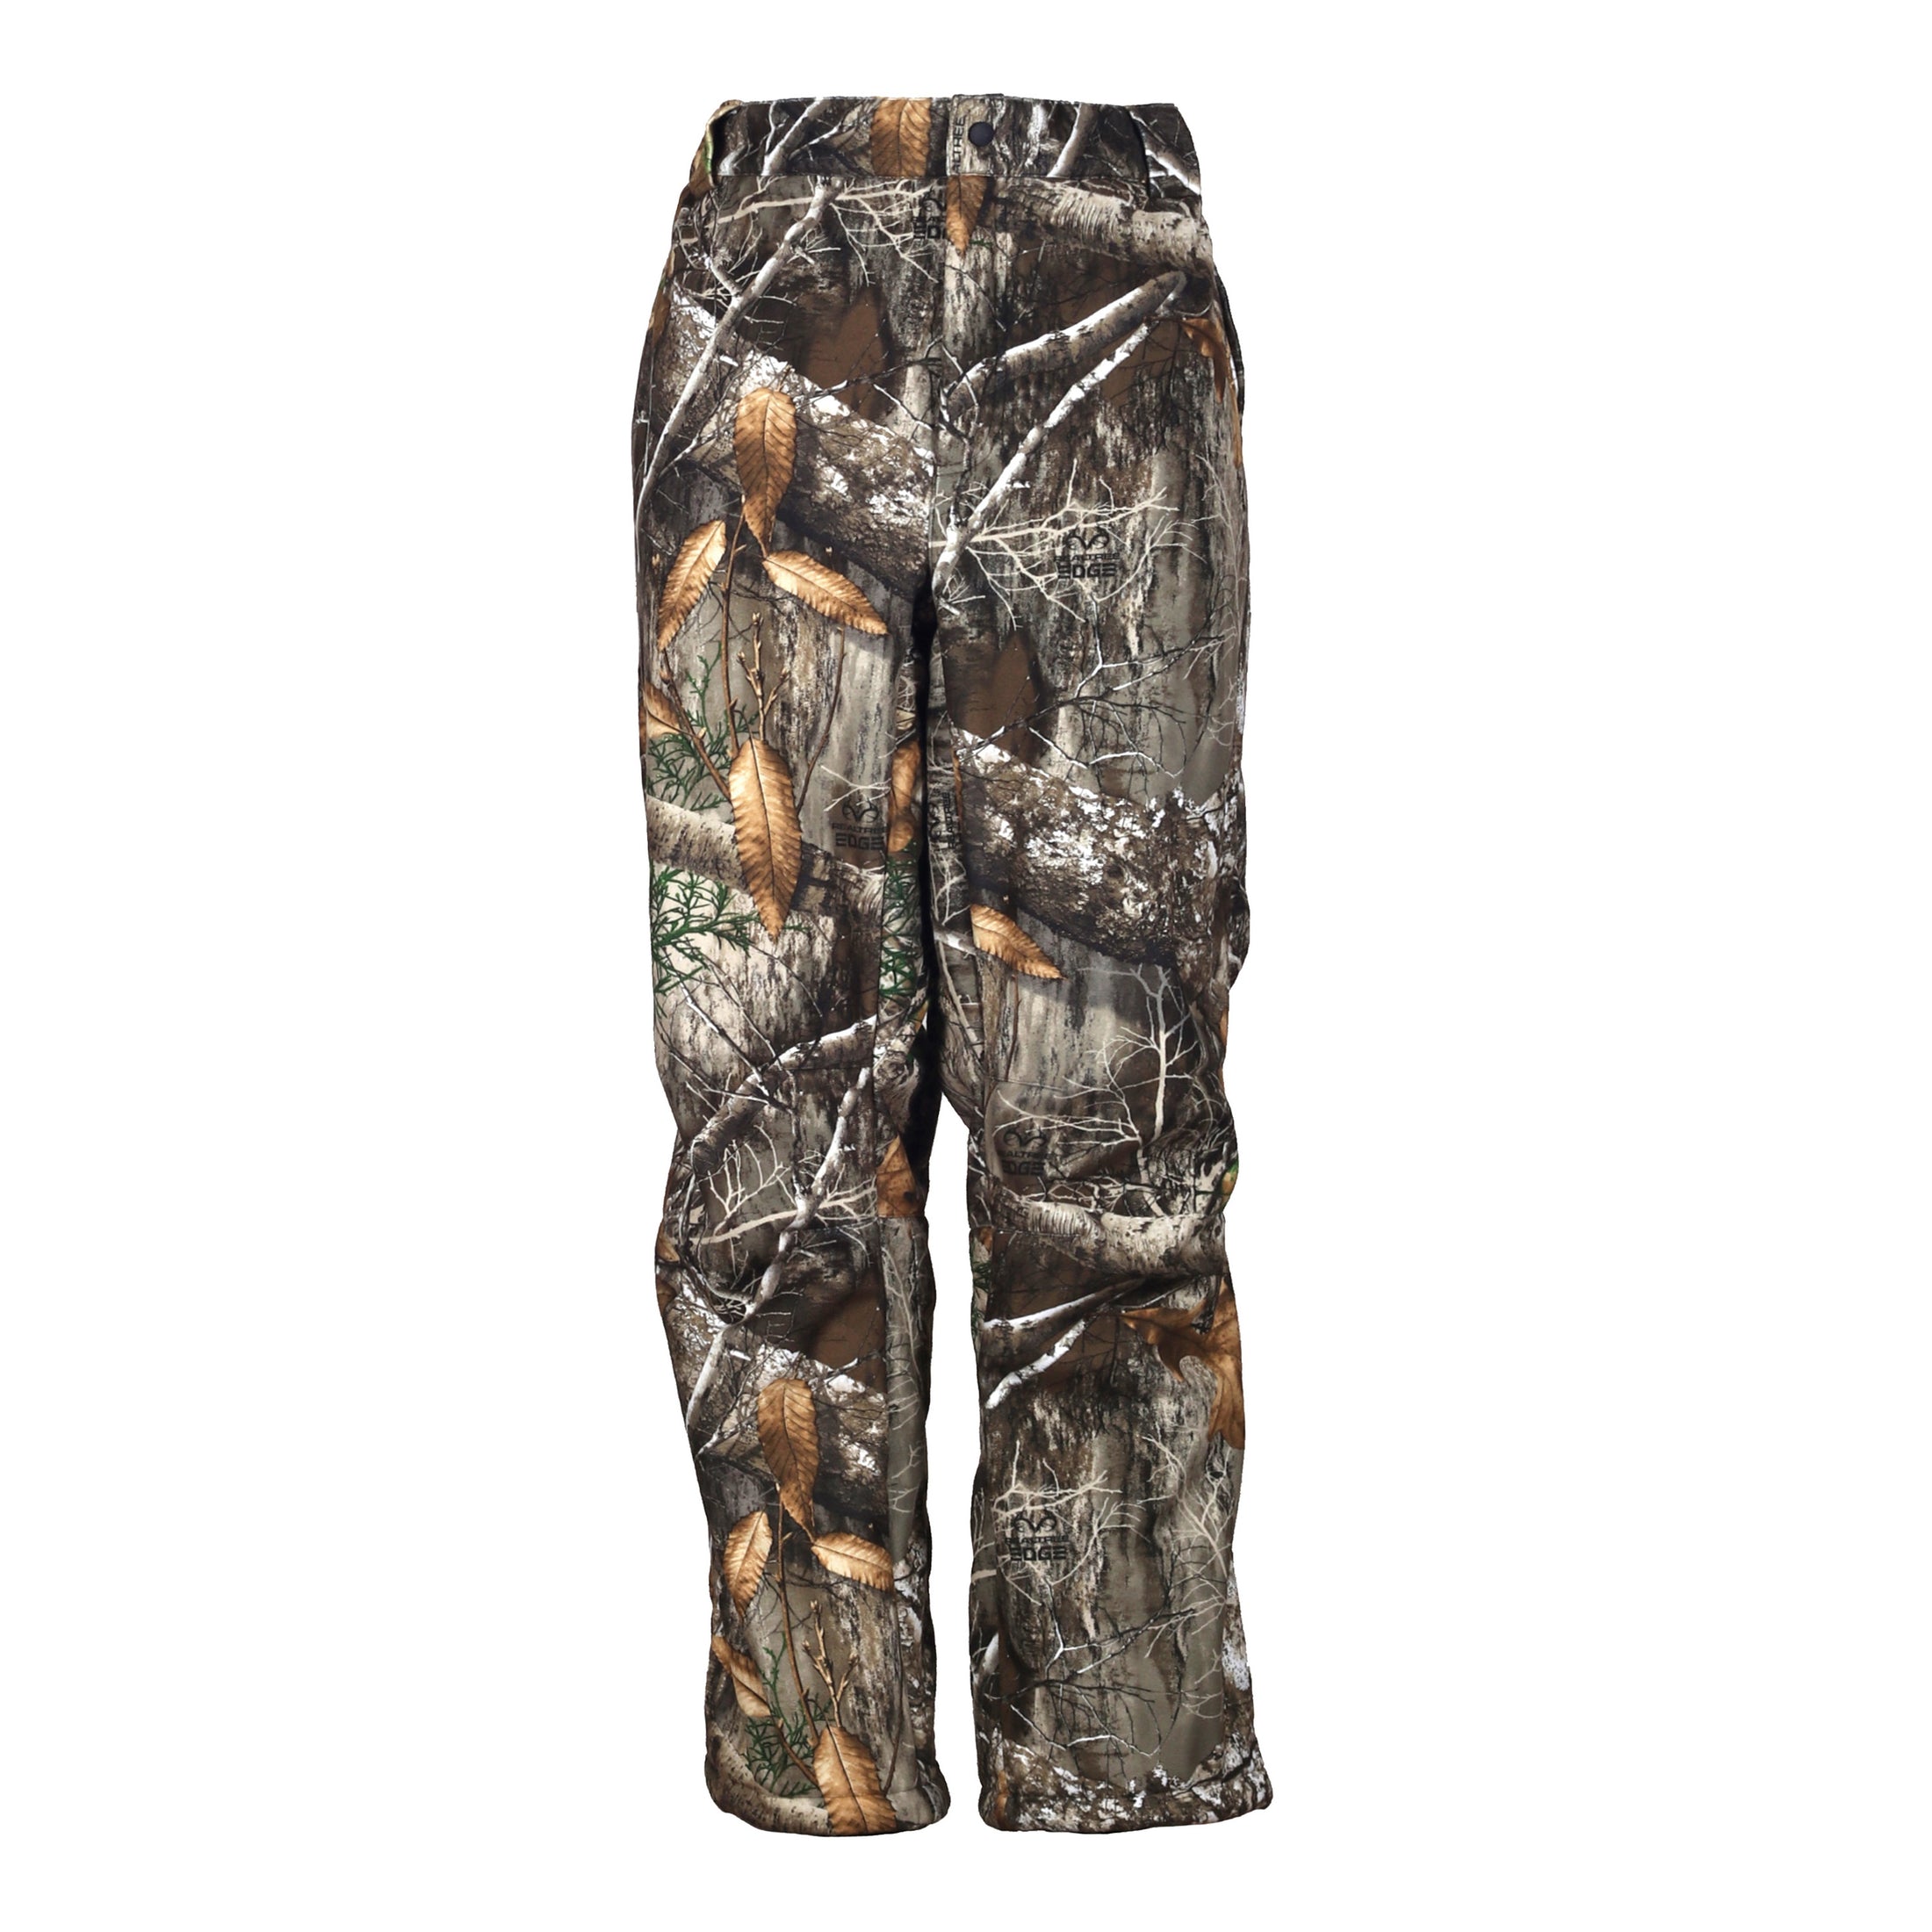 gamehide Pinch Point Pant front (realtree edge)